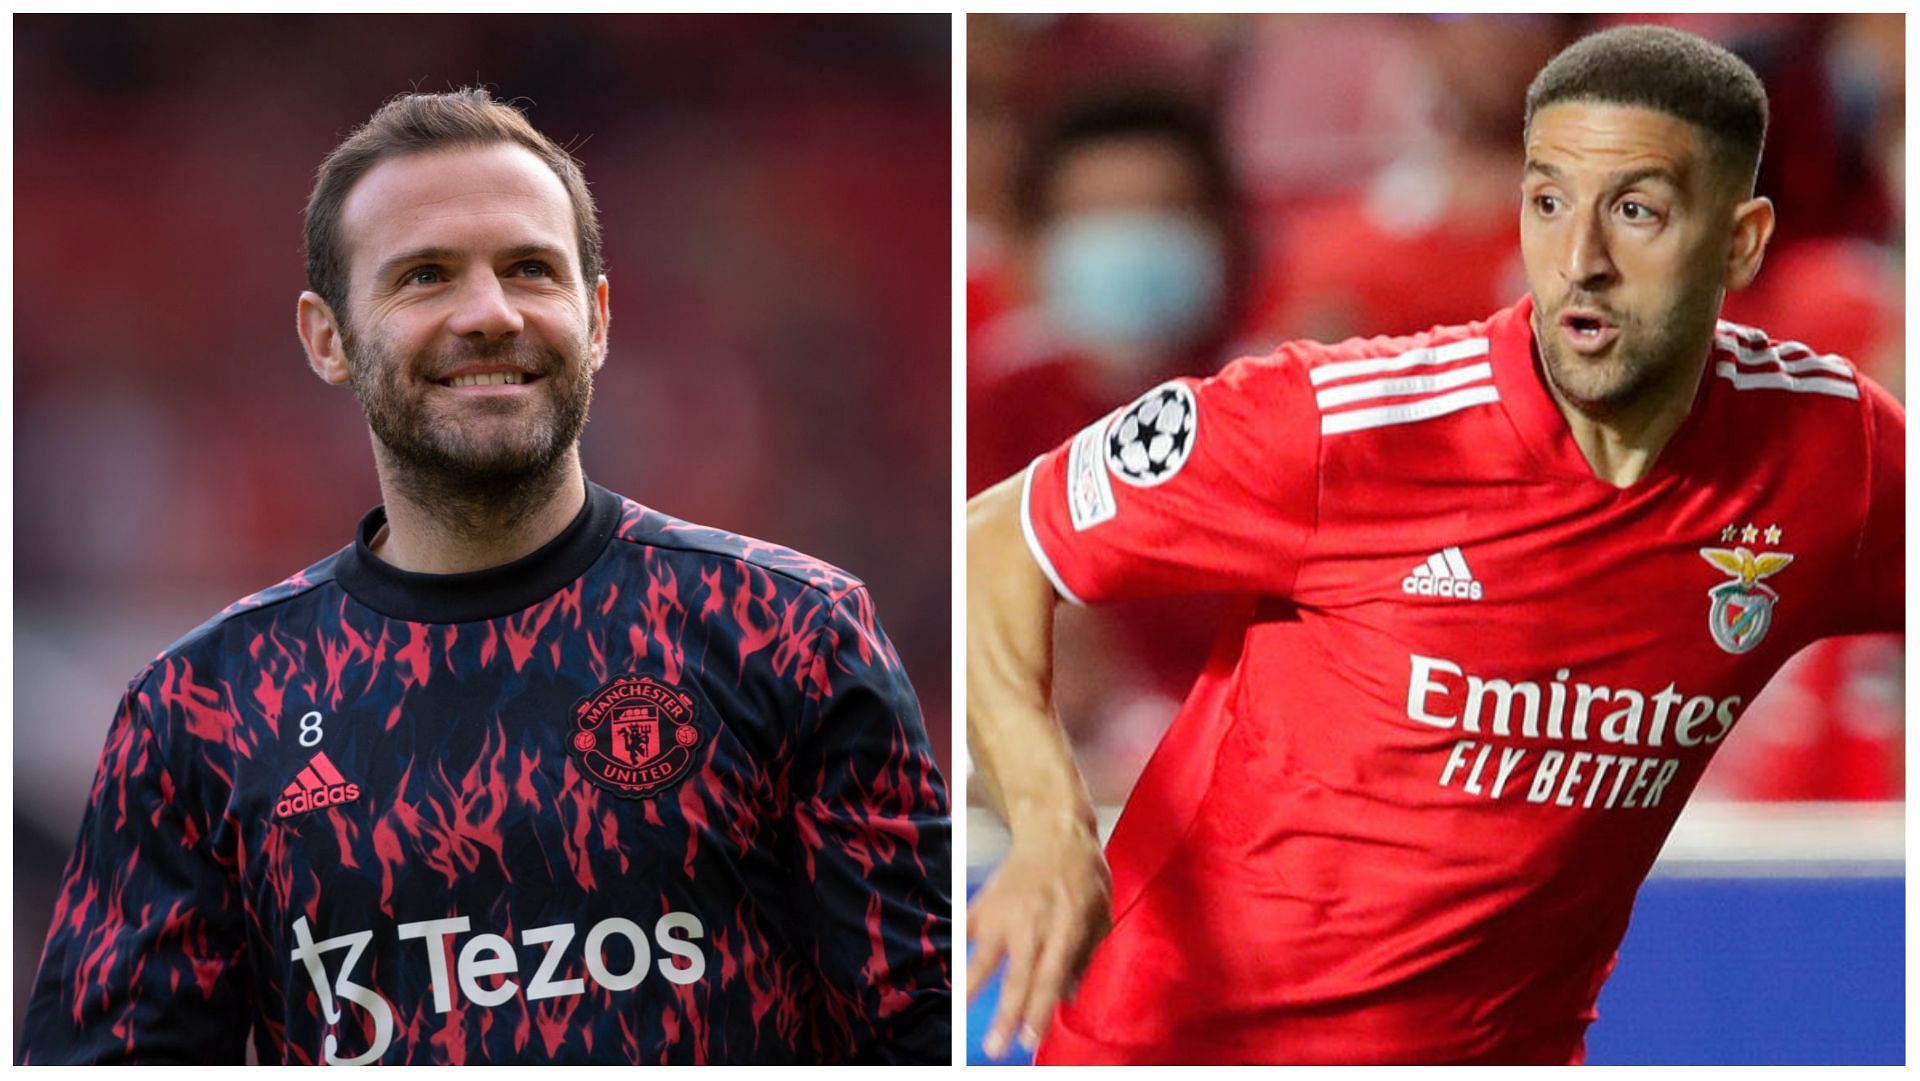 These free agents will be valuable additions to any squad in FIFA 23 career mode (Images via Getty Images)